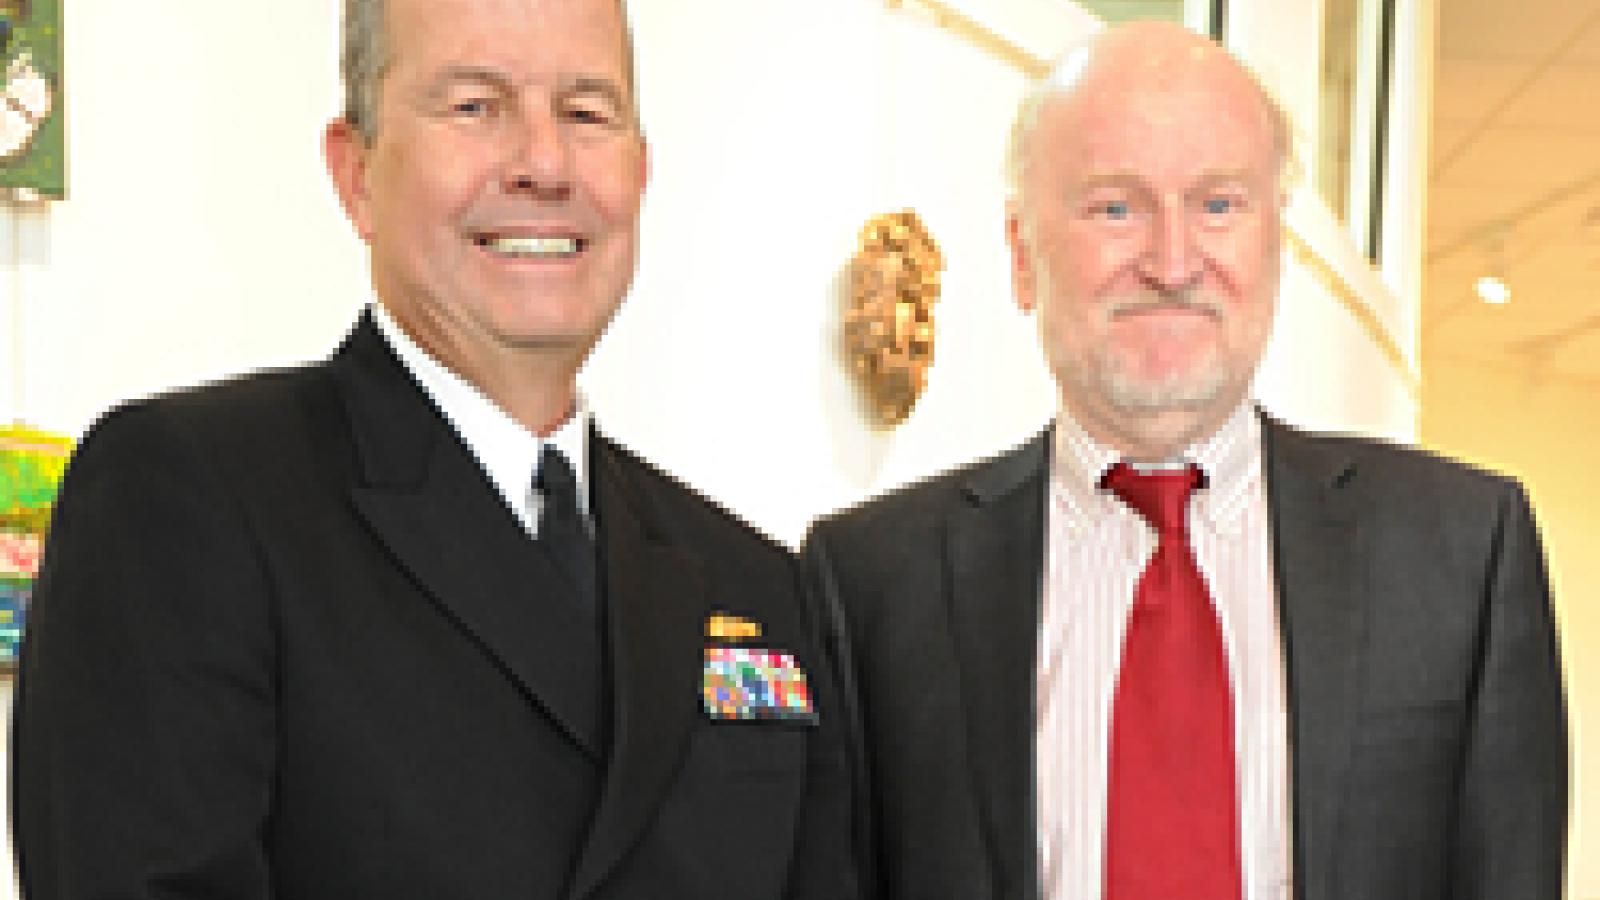 Rear Admiral Alton L. Stocks, Commander of Walter Reed National Military Medical Center, and NEA Chairman Rocco Landesman